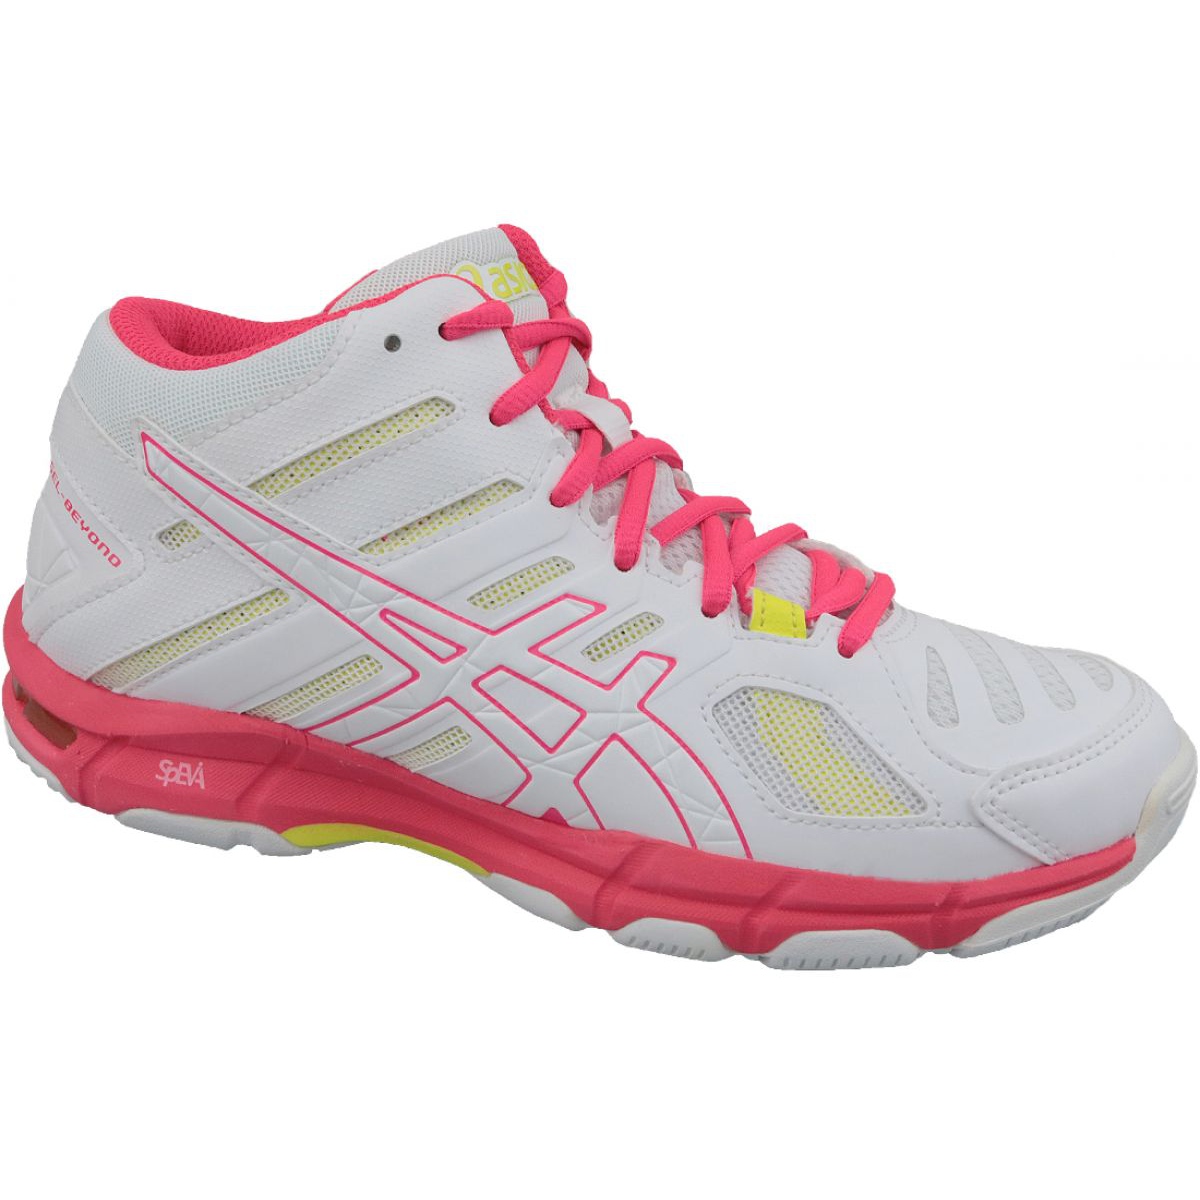 Diligence Talje fritid Asics Gel-Beyond 5 Mt W B650N-100 volleyball shoes white multicolored -  KeeShoes